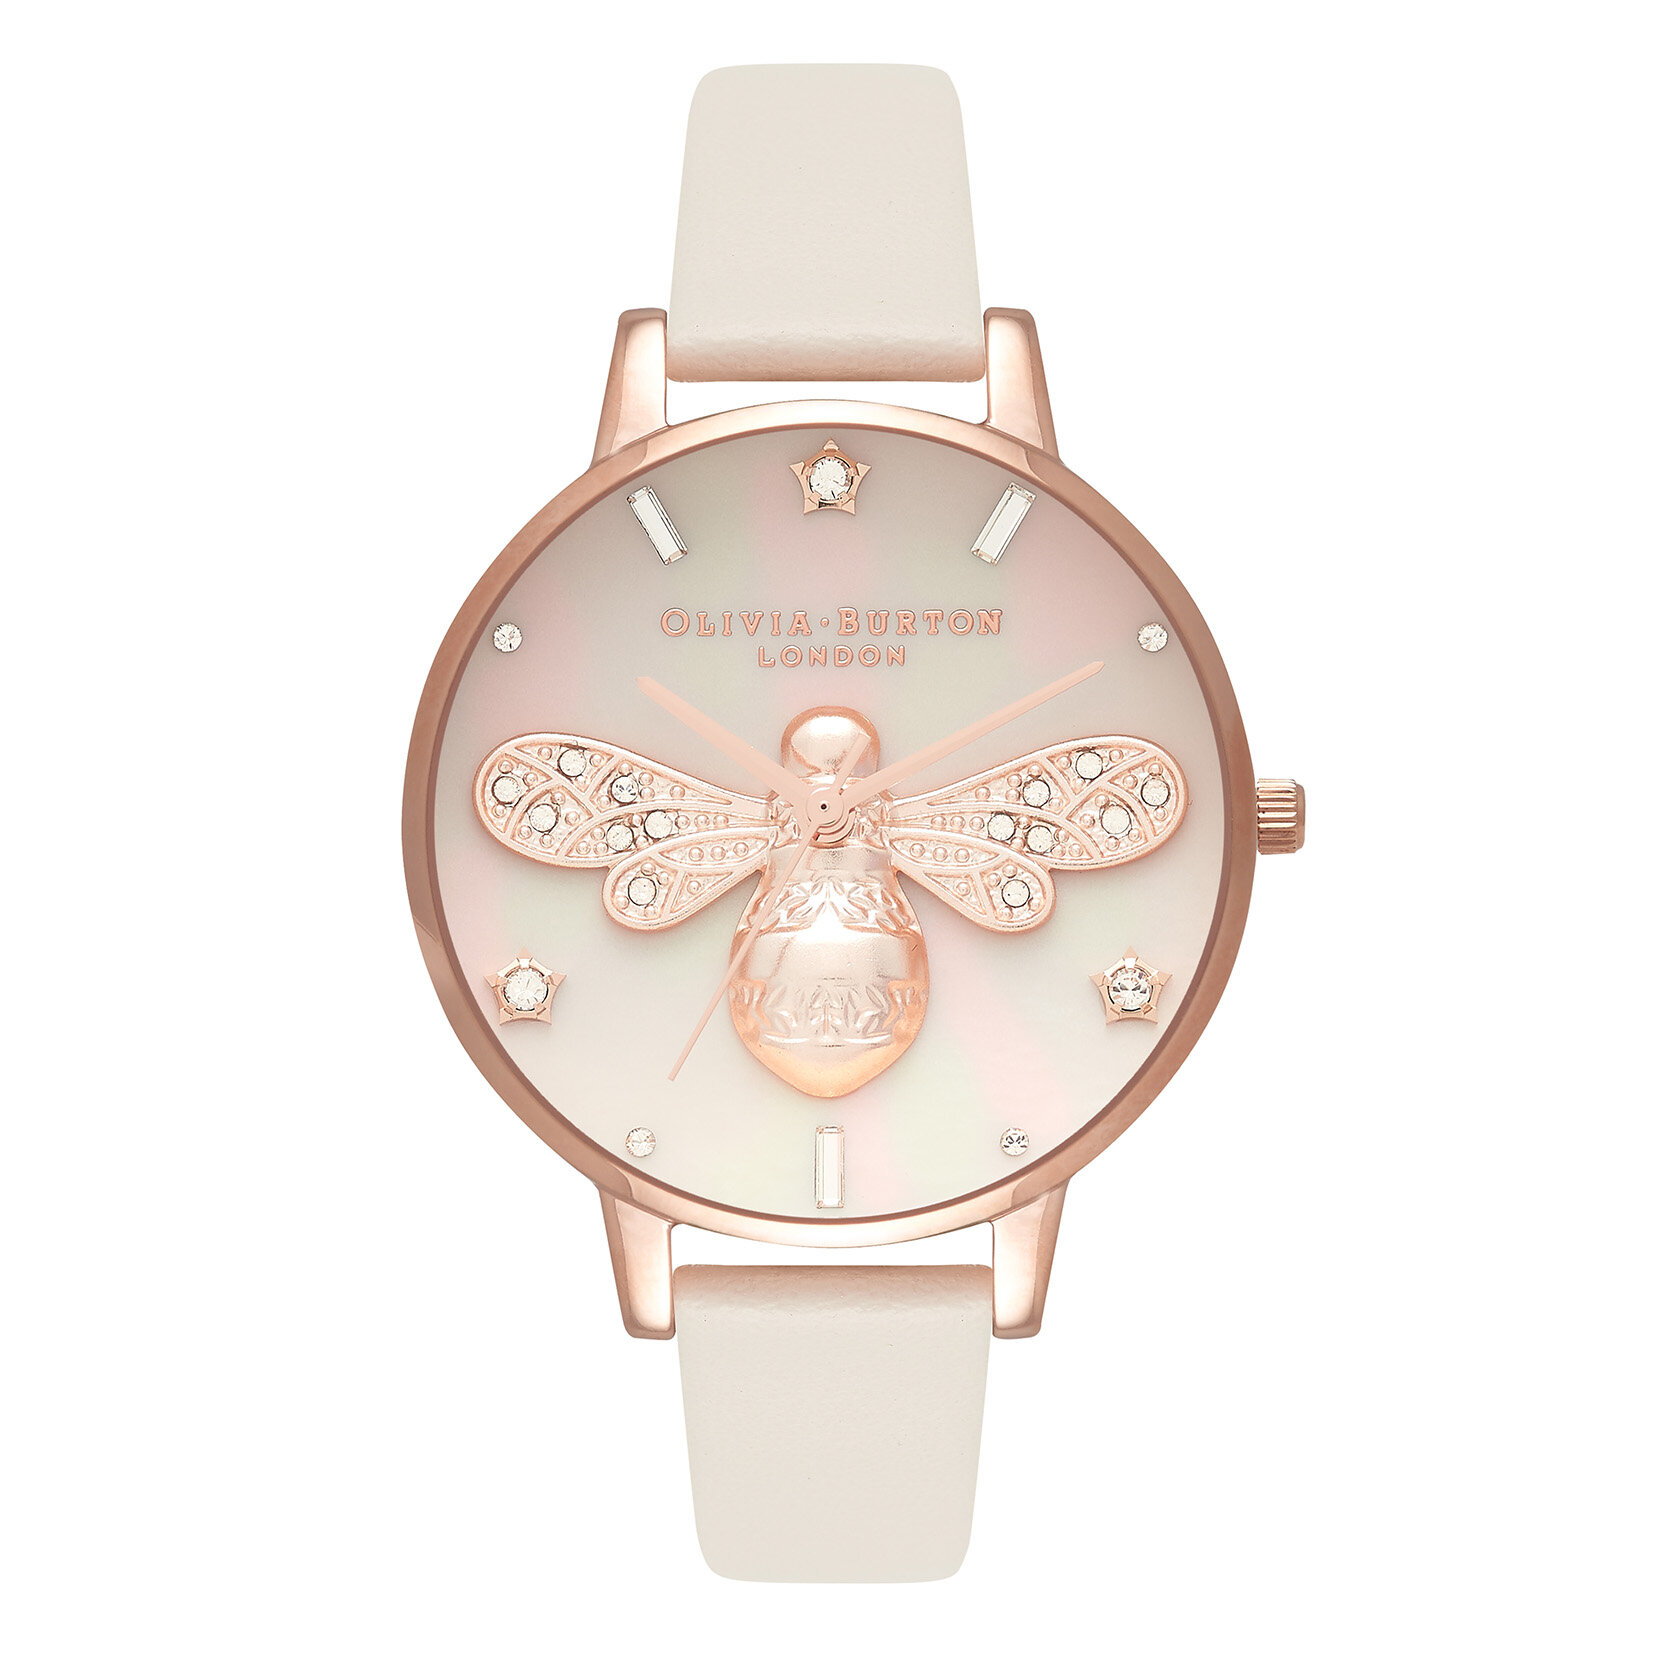 34mm Rose Gold & Blush Leather Strap Watch